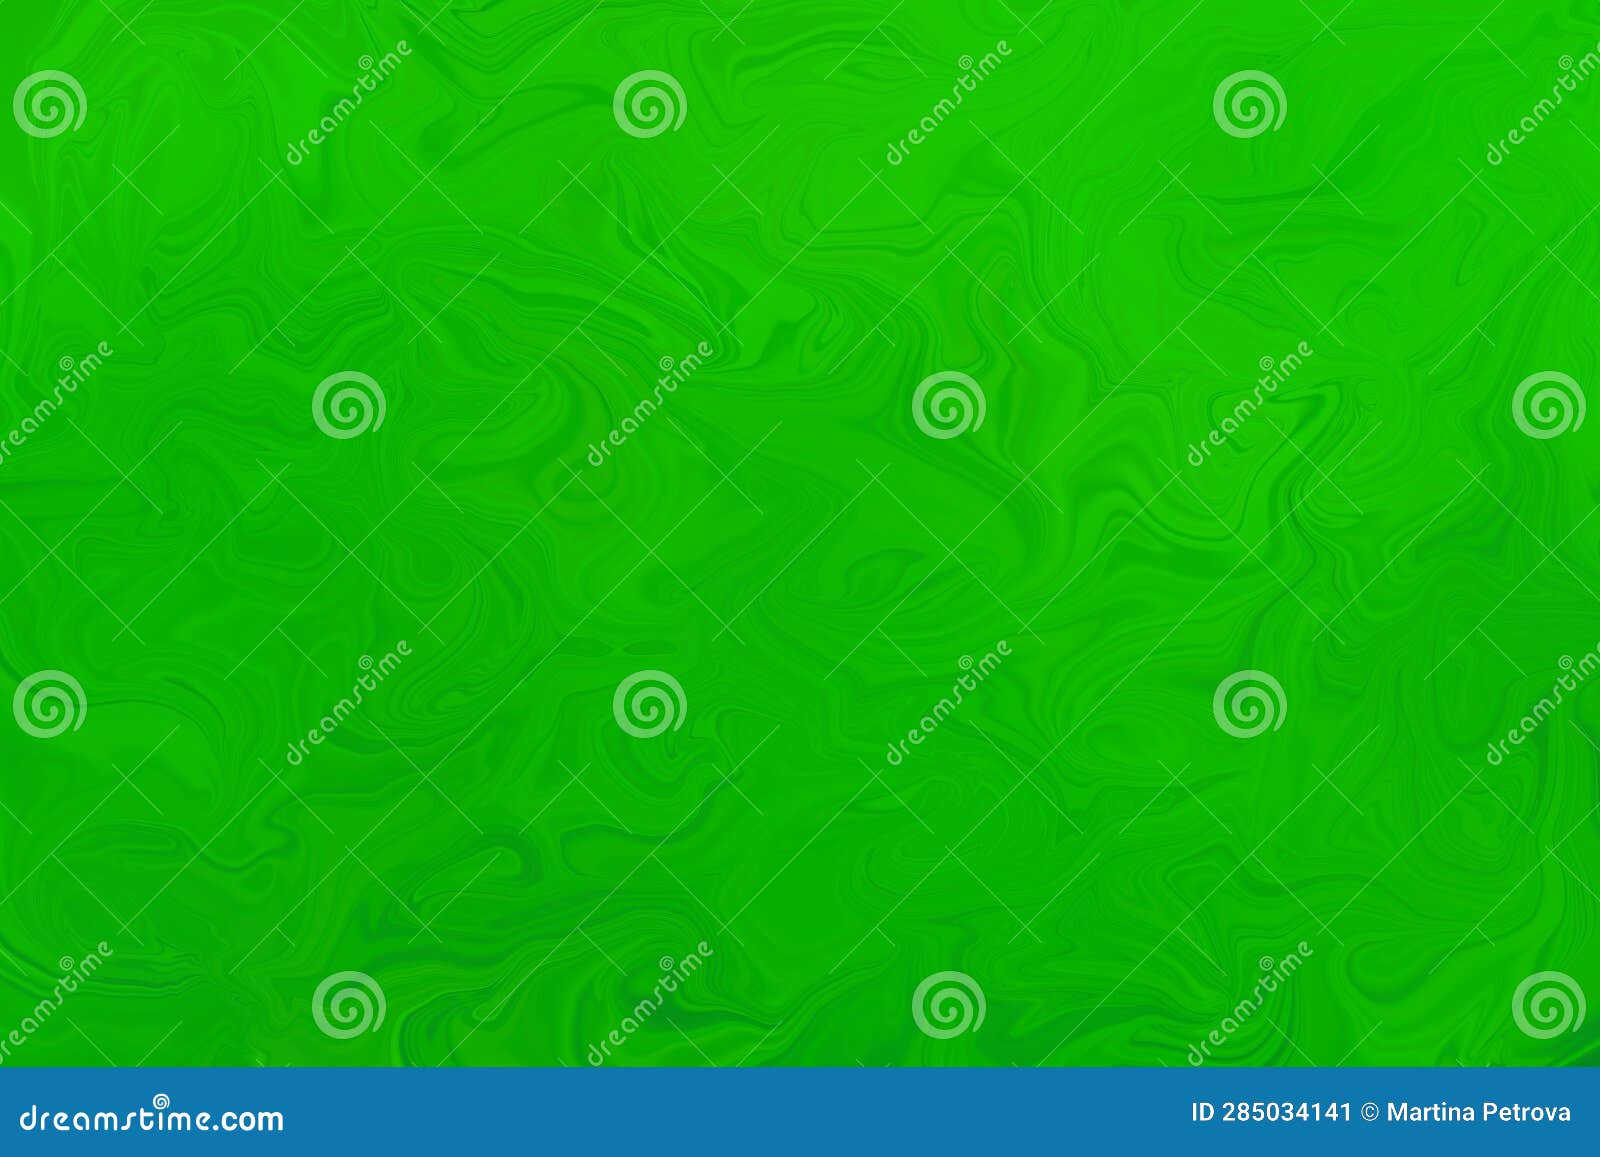 background, blending shades of vibrant green, reminiscent of oil slicks on the surface of water.